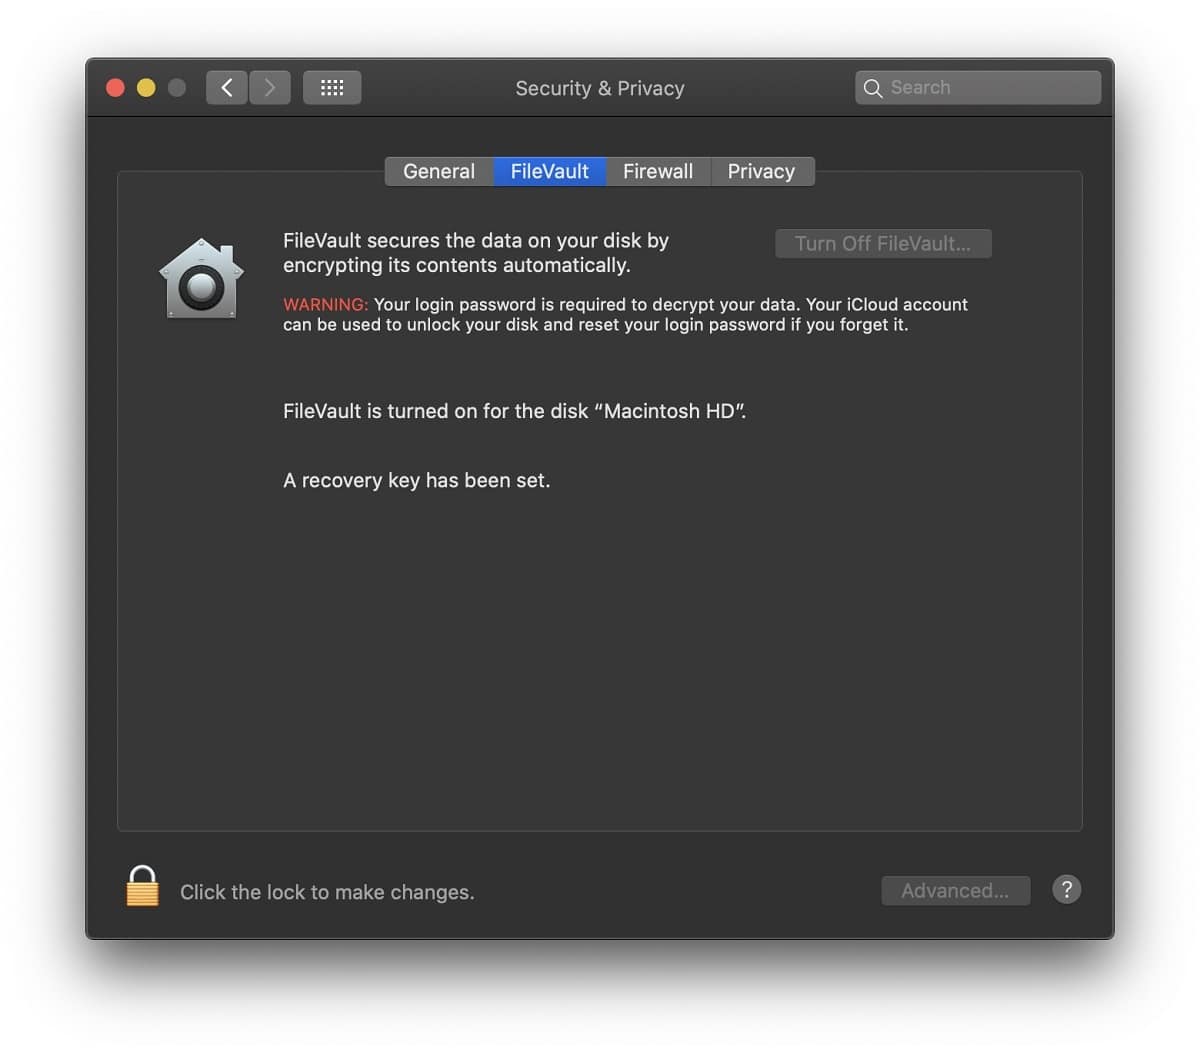 Manage FileVault encryption on macOS